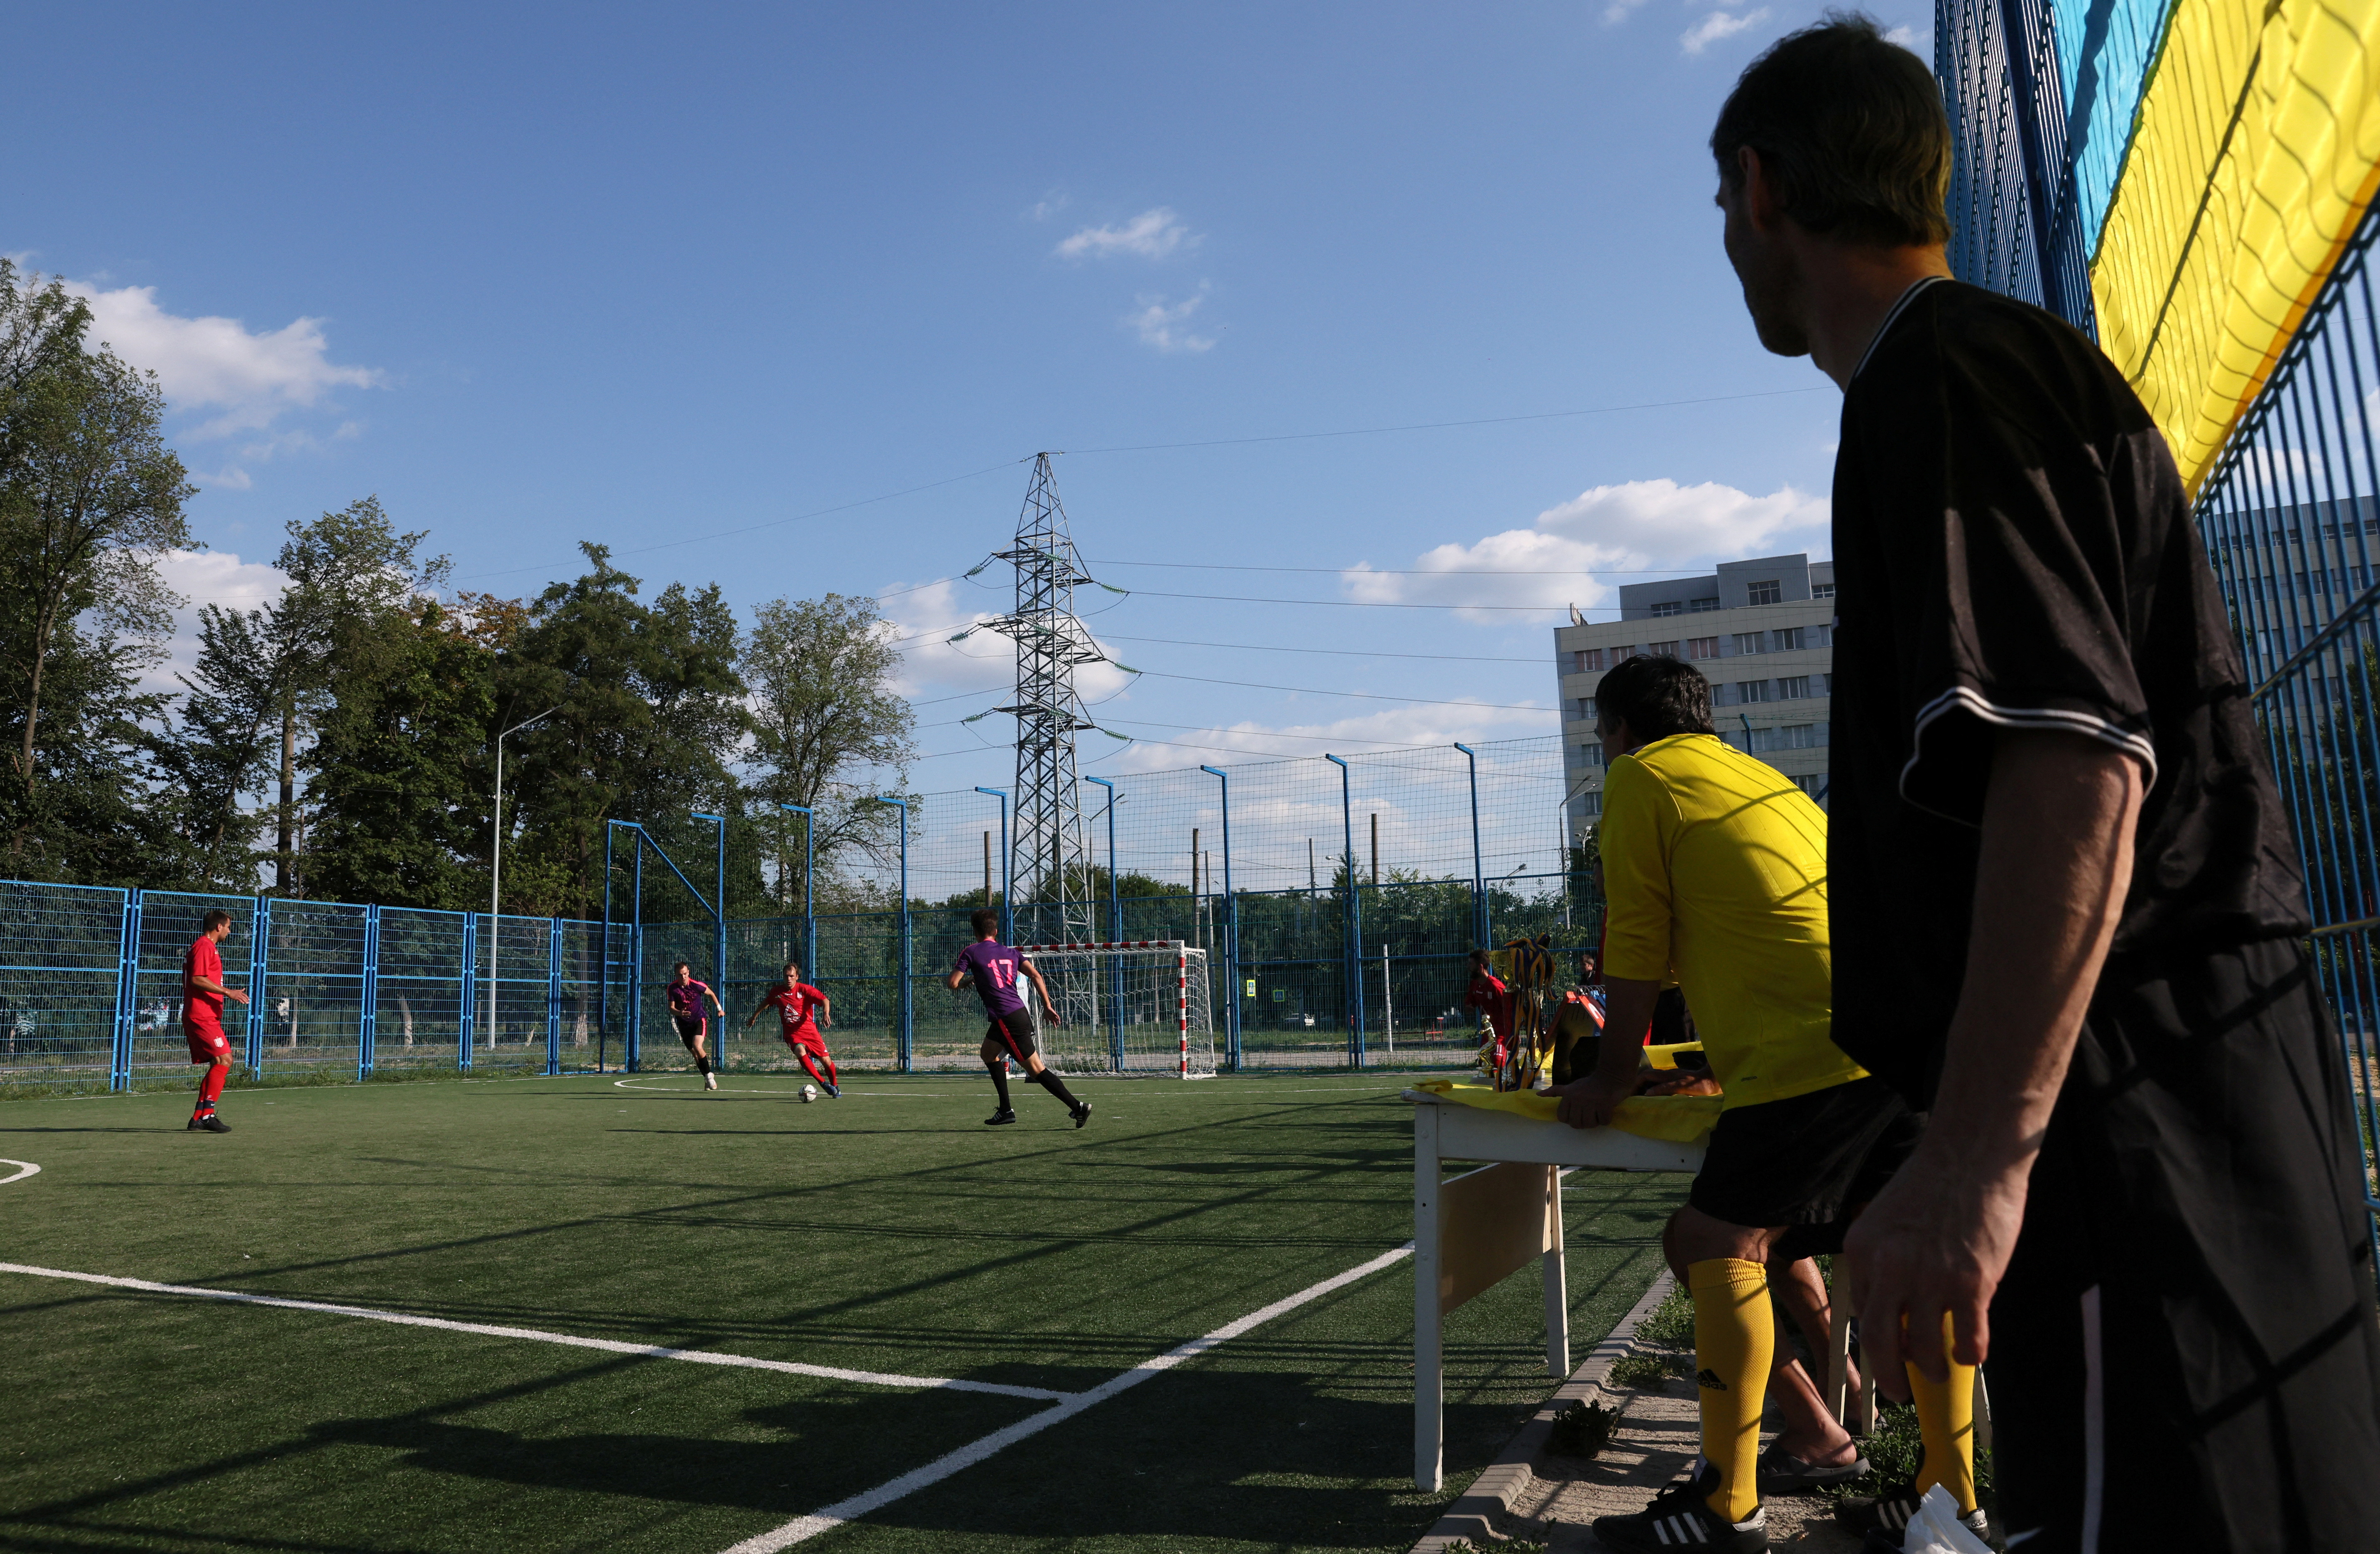 Soccer tournament to honor Andrey Doroshev, a beloved children’s soccer coach, who was killed in a shelling attack last week, in Kharkiv